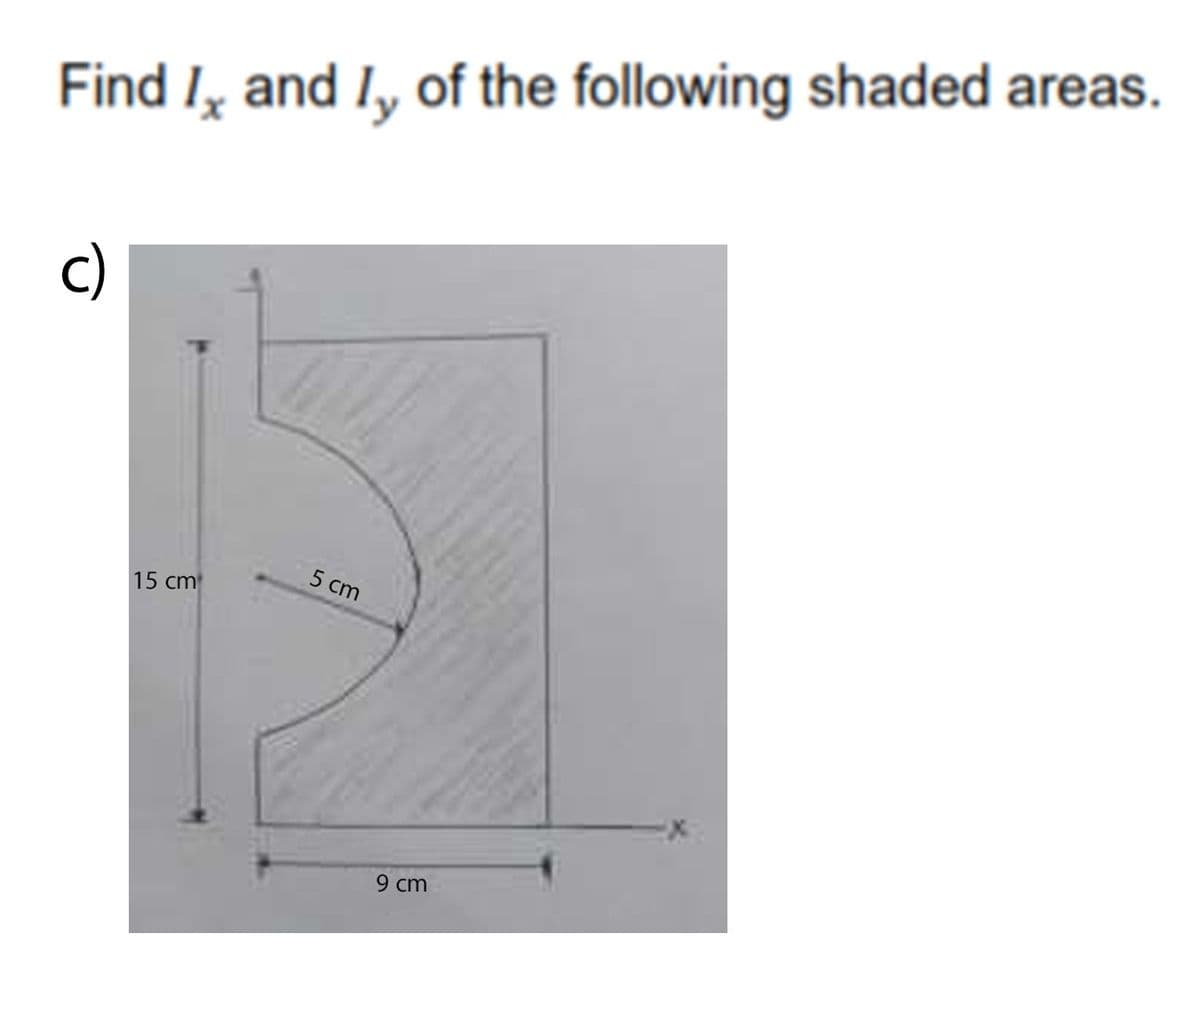 Find I, and I, of the following shaded areas.
c)
5 cm
15 cm
9 cm
